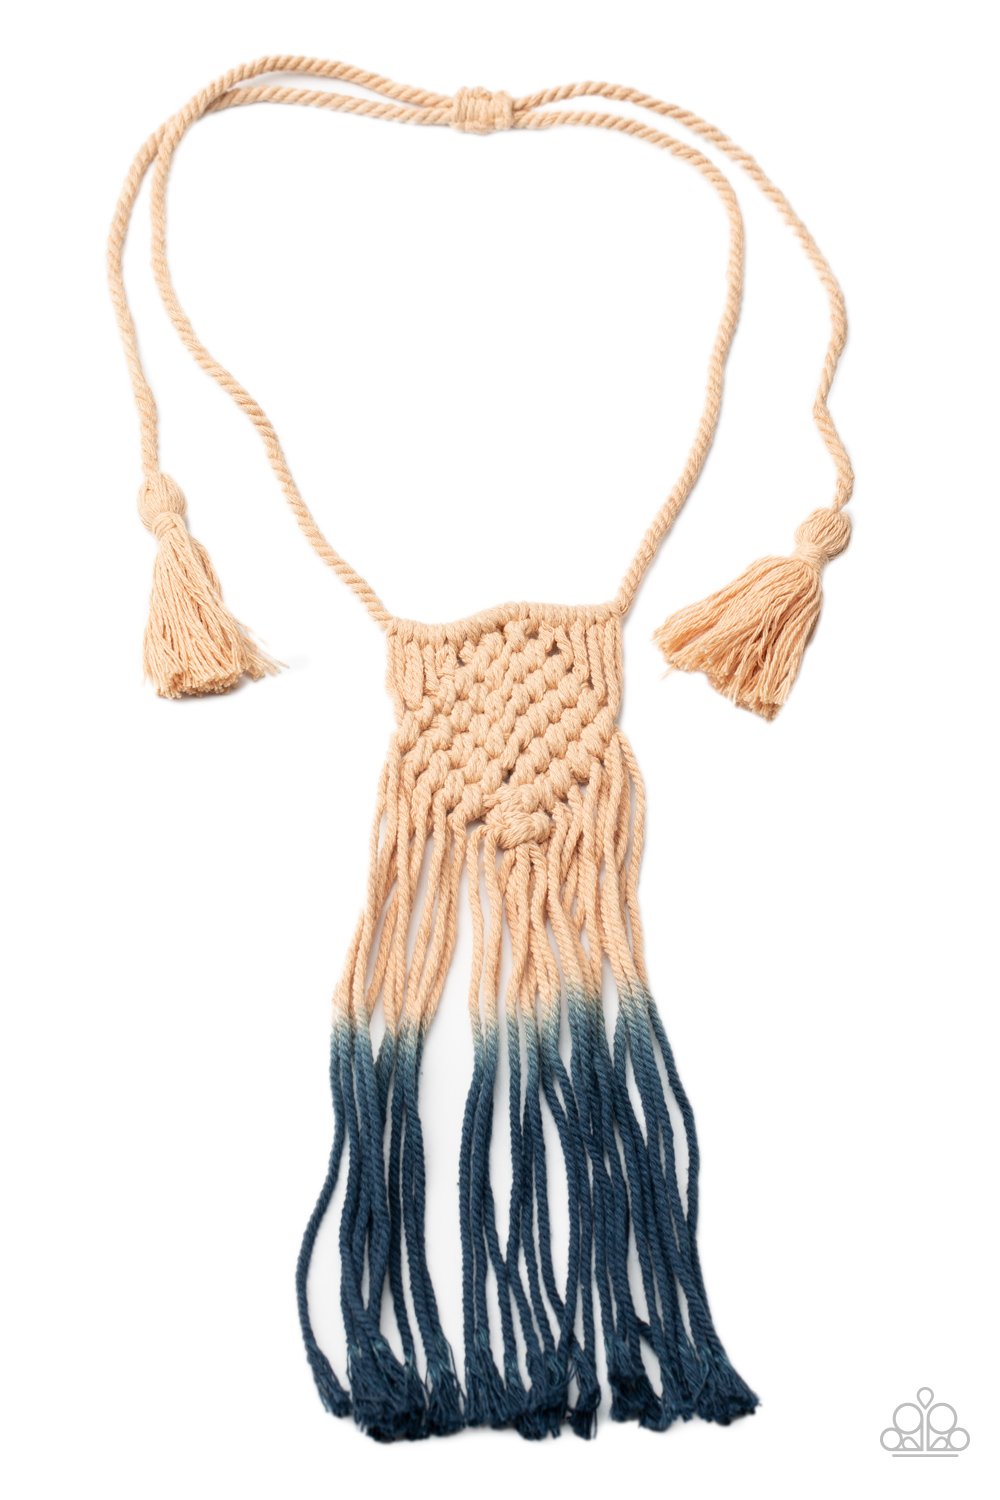 Paparazzi - Look At Macrame Now - Blue Necklace - Alies Bling Bar